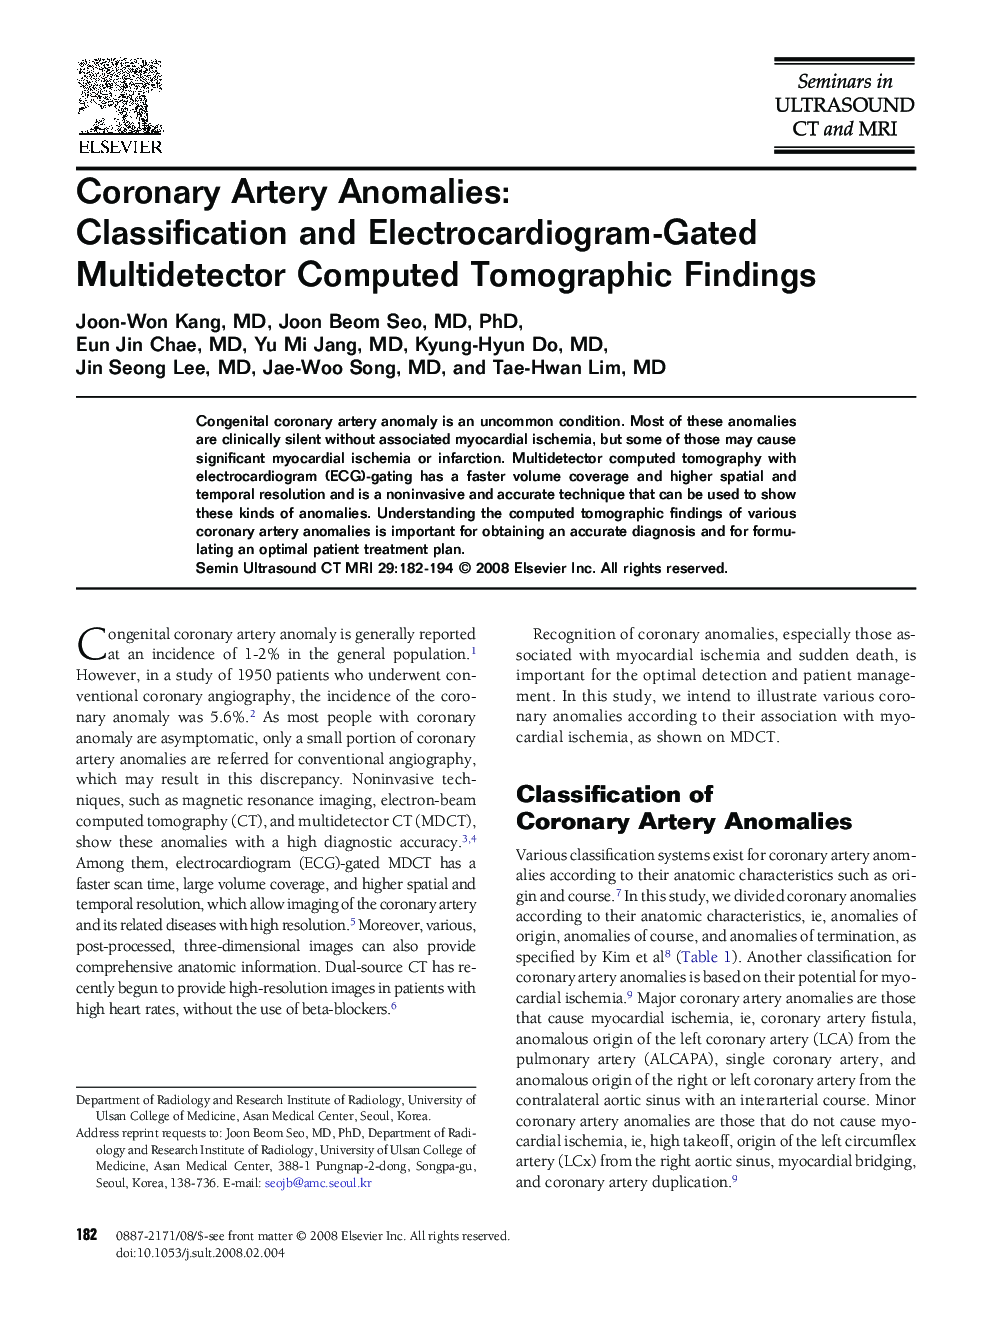 Coronary Artery Anomalies: Classification and Electrocardiogram-Gated Multidetector Computed Tomographic Findings